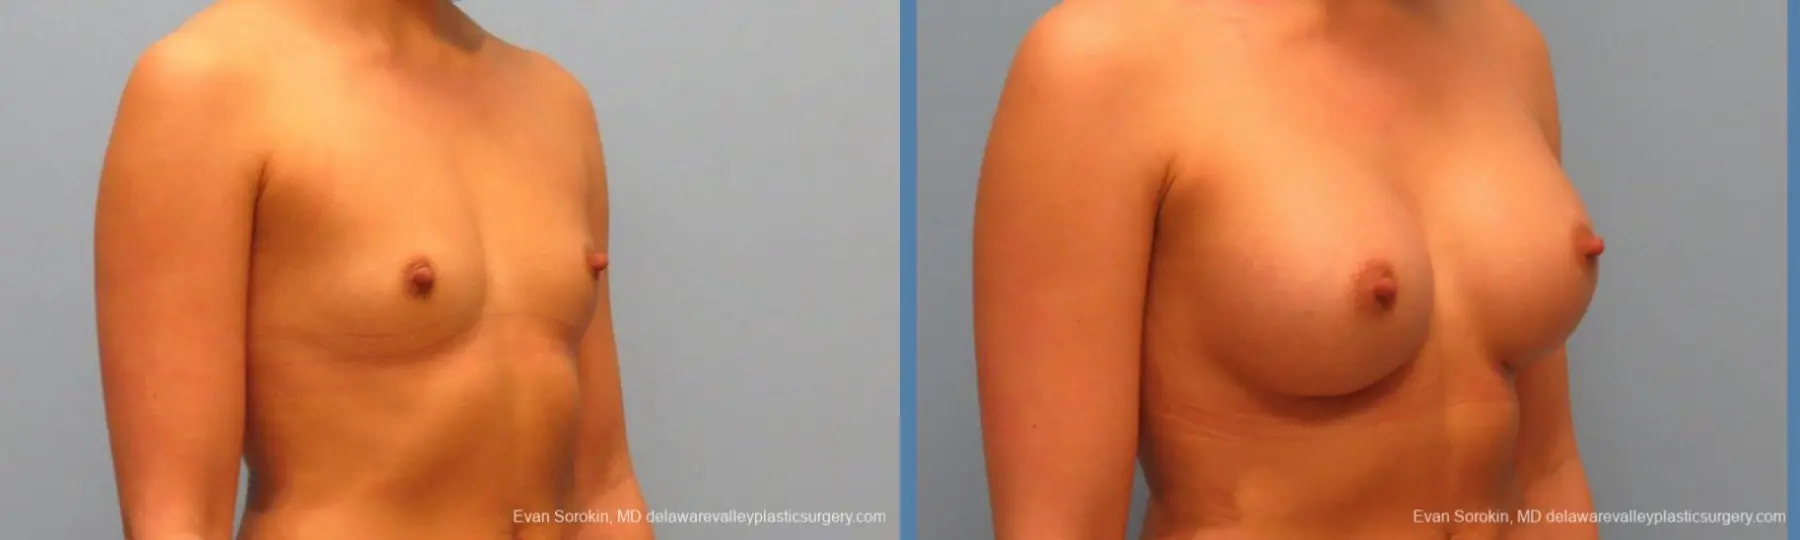 Philadelphia Breast Augmentation 9410 - Before and After 2